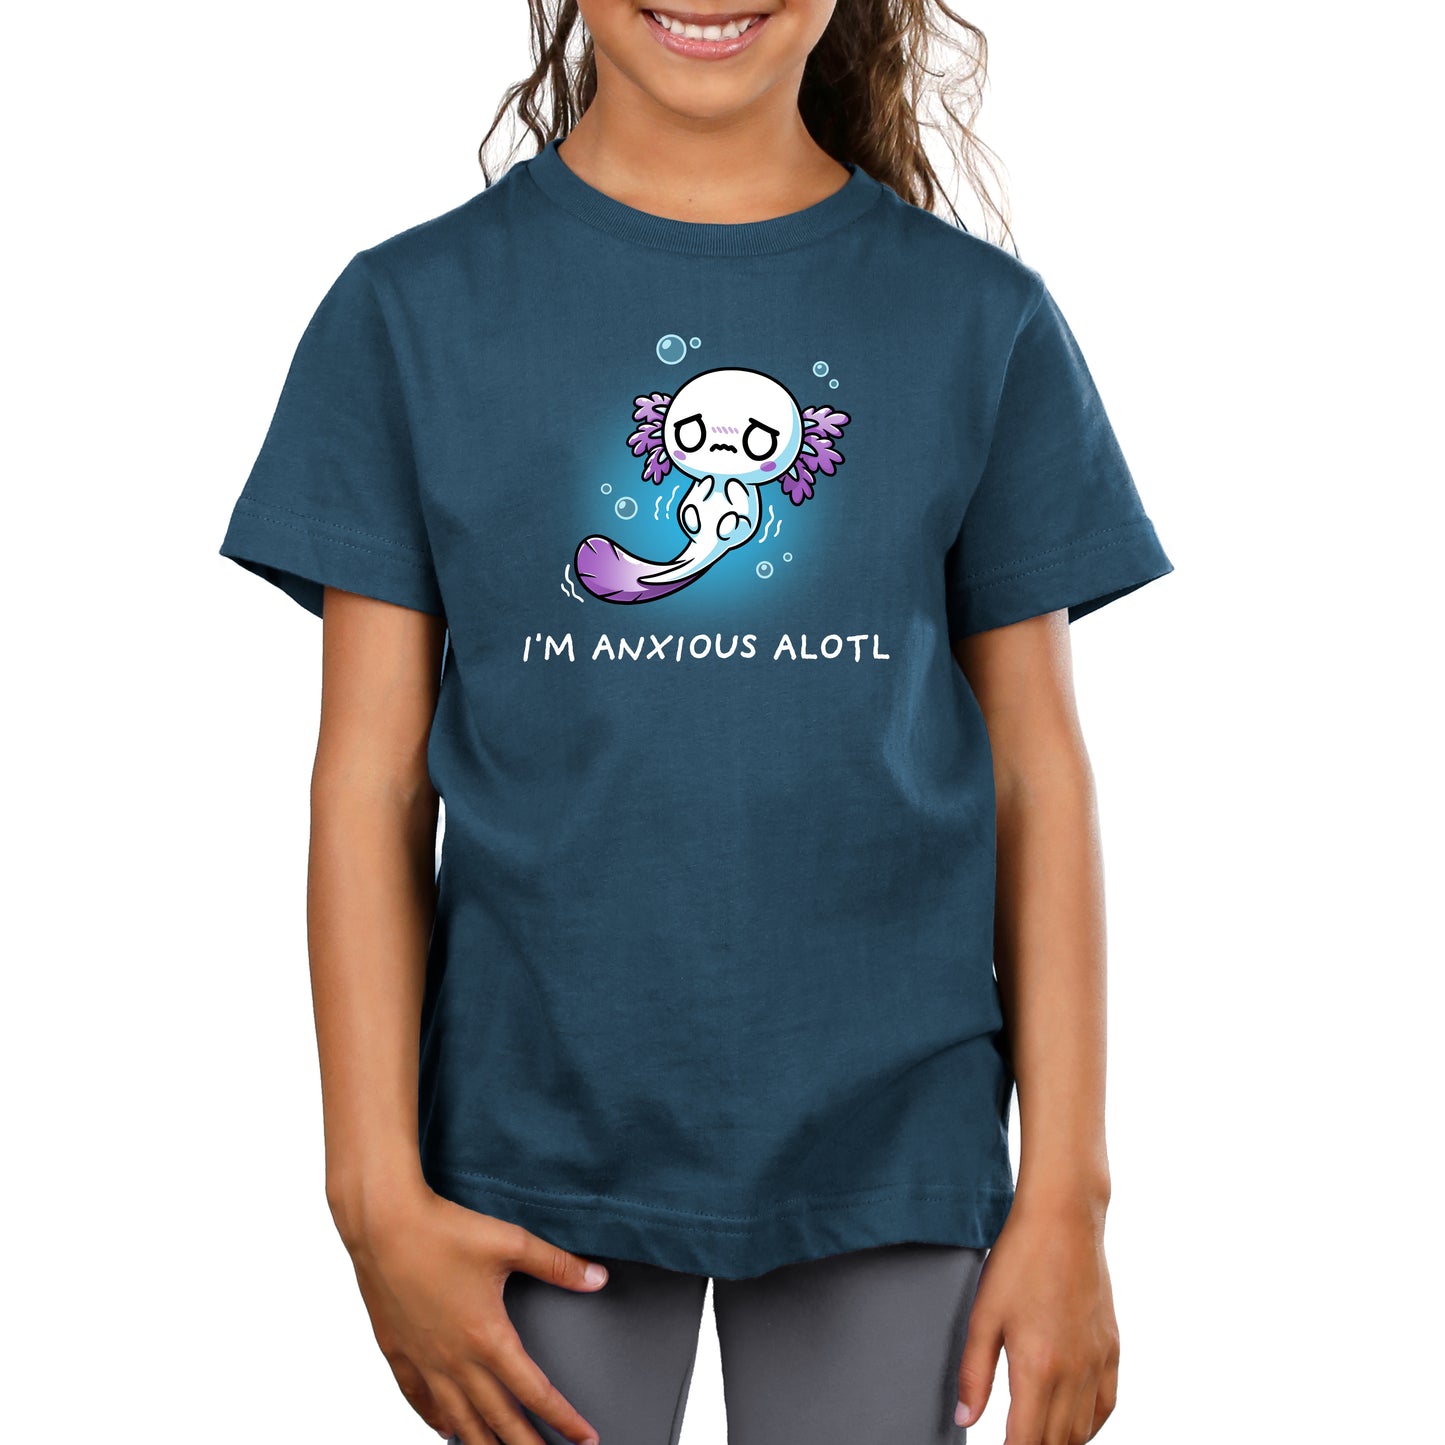 A smiling child wears a denim-colored t-shirt made from Super Soft Ringspun Cotton, featuring a cute axolotl illustration and the text "I'm Anxious Alotl" from monsterdigital.